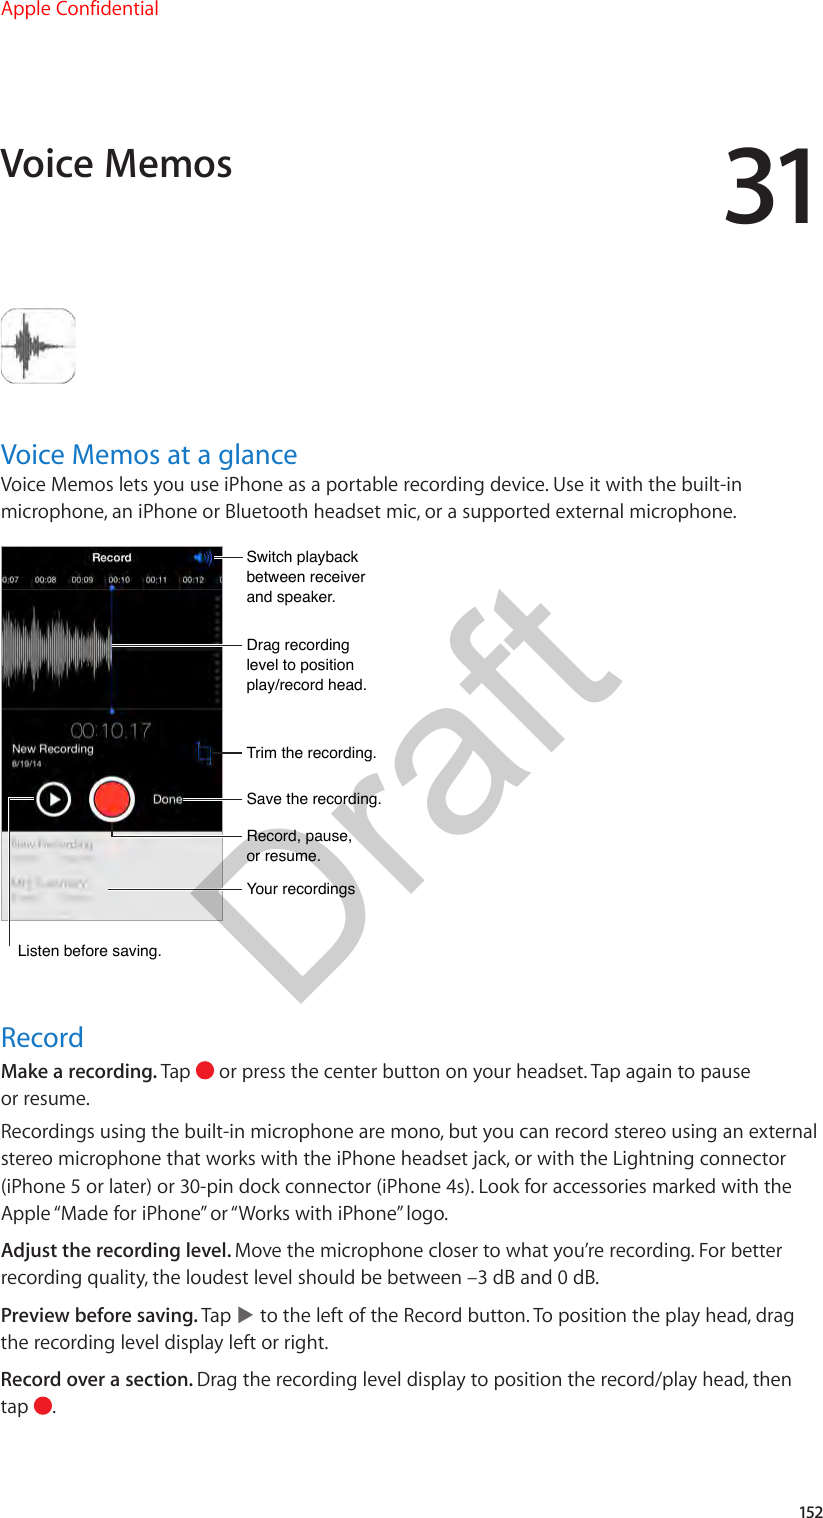 31152Voice Memos at a glanceVoice Memos lets you use iPhone as a portable recording device. Use it with the built-in microphone, an iPhone or Bluetooth headset mic, or a supported external microphone.Drag recording level to position play/record head.Drag recording level to position play/record head.Record, pause, or resume.Record, pause, or resume.Trim the recording.Trim the recording.Switch playback between receiver and speaker.Switch playback between receiver and speaker.Save the recording.Save the recording.Your recordingsYour recordingsListen before saving.Listen before saving.RecordMake a recording. Tap   or press the center button on your headset. Tap again to pause or resume.Recordings using the built-in microphone are mono, but you can record stereo using an external stereo microphone that works with the iPhone headset jack, or with the Lightning connector (iPhone 5 or later) or 30-pin dock connector (iPhone 4s). Look for accessories marked with the Apple “Made for iPhone” or “Works with iPhone” logo.Adjust the recording level. Move the microphone closer to what you’re recording. For better recording quality, the loudest level should be between –3 dB and 0 dB.Preview before saving. Tap   to the left of the Record button. To position the play head, drag the recording level display left or right.Record over a section. Drag the recording level display to position the record/play head, then tap  .Voice MemosApple ConfidentialDraft